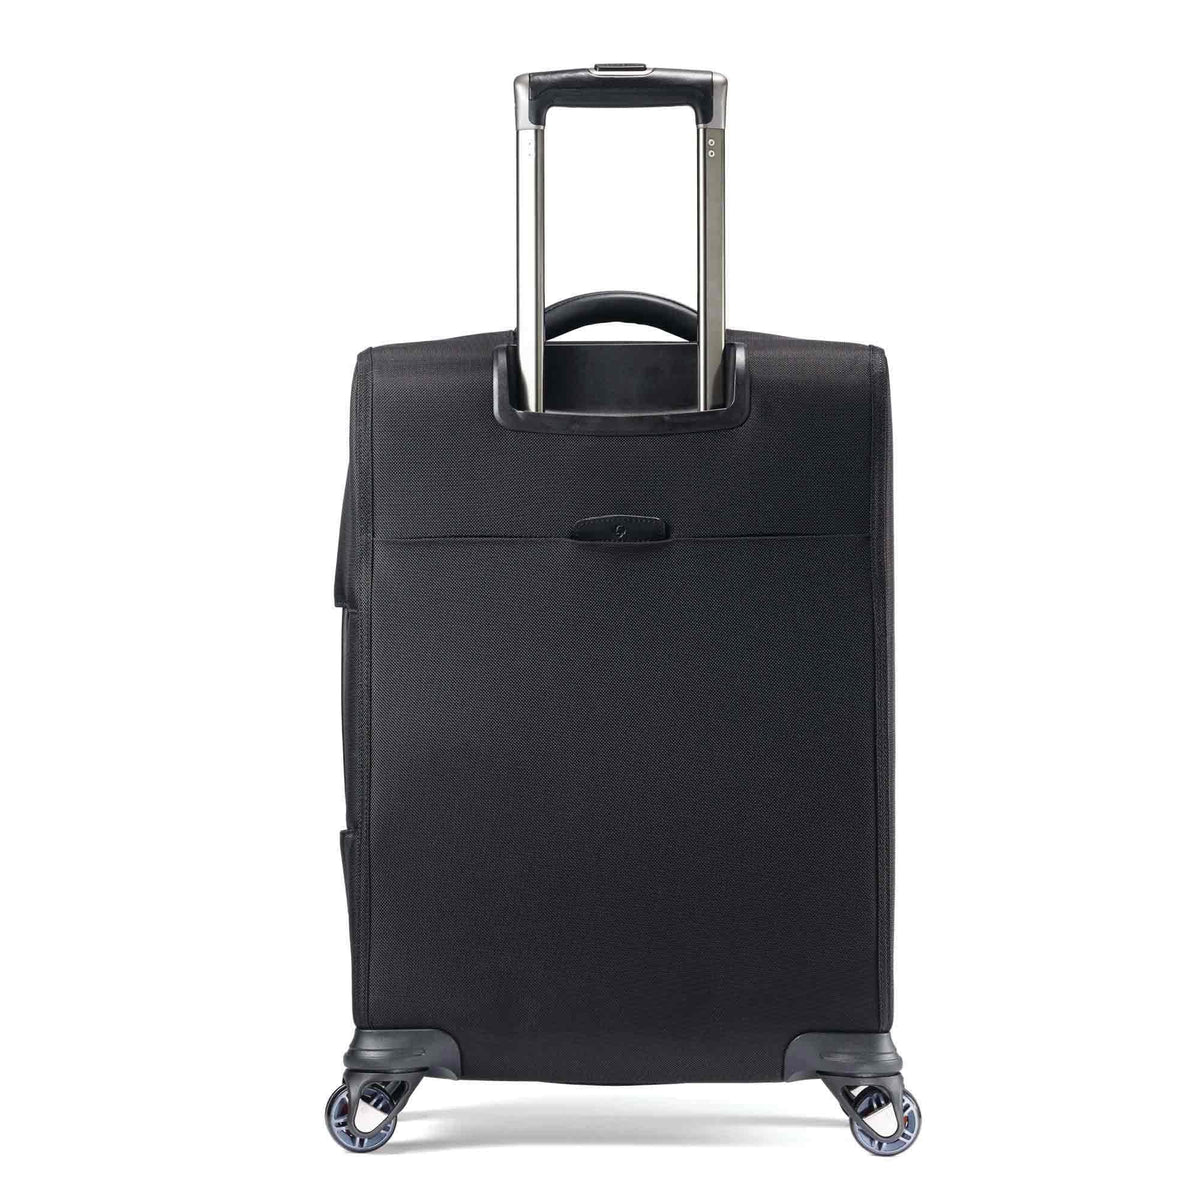 Samsonite Pro 4 DLX Expandable 21" Spinner Carry-on Wheeled Luggage